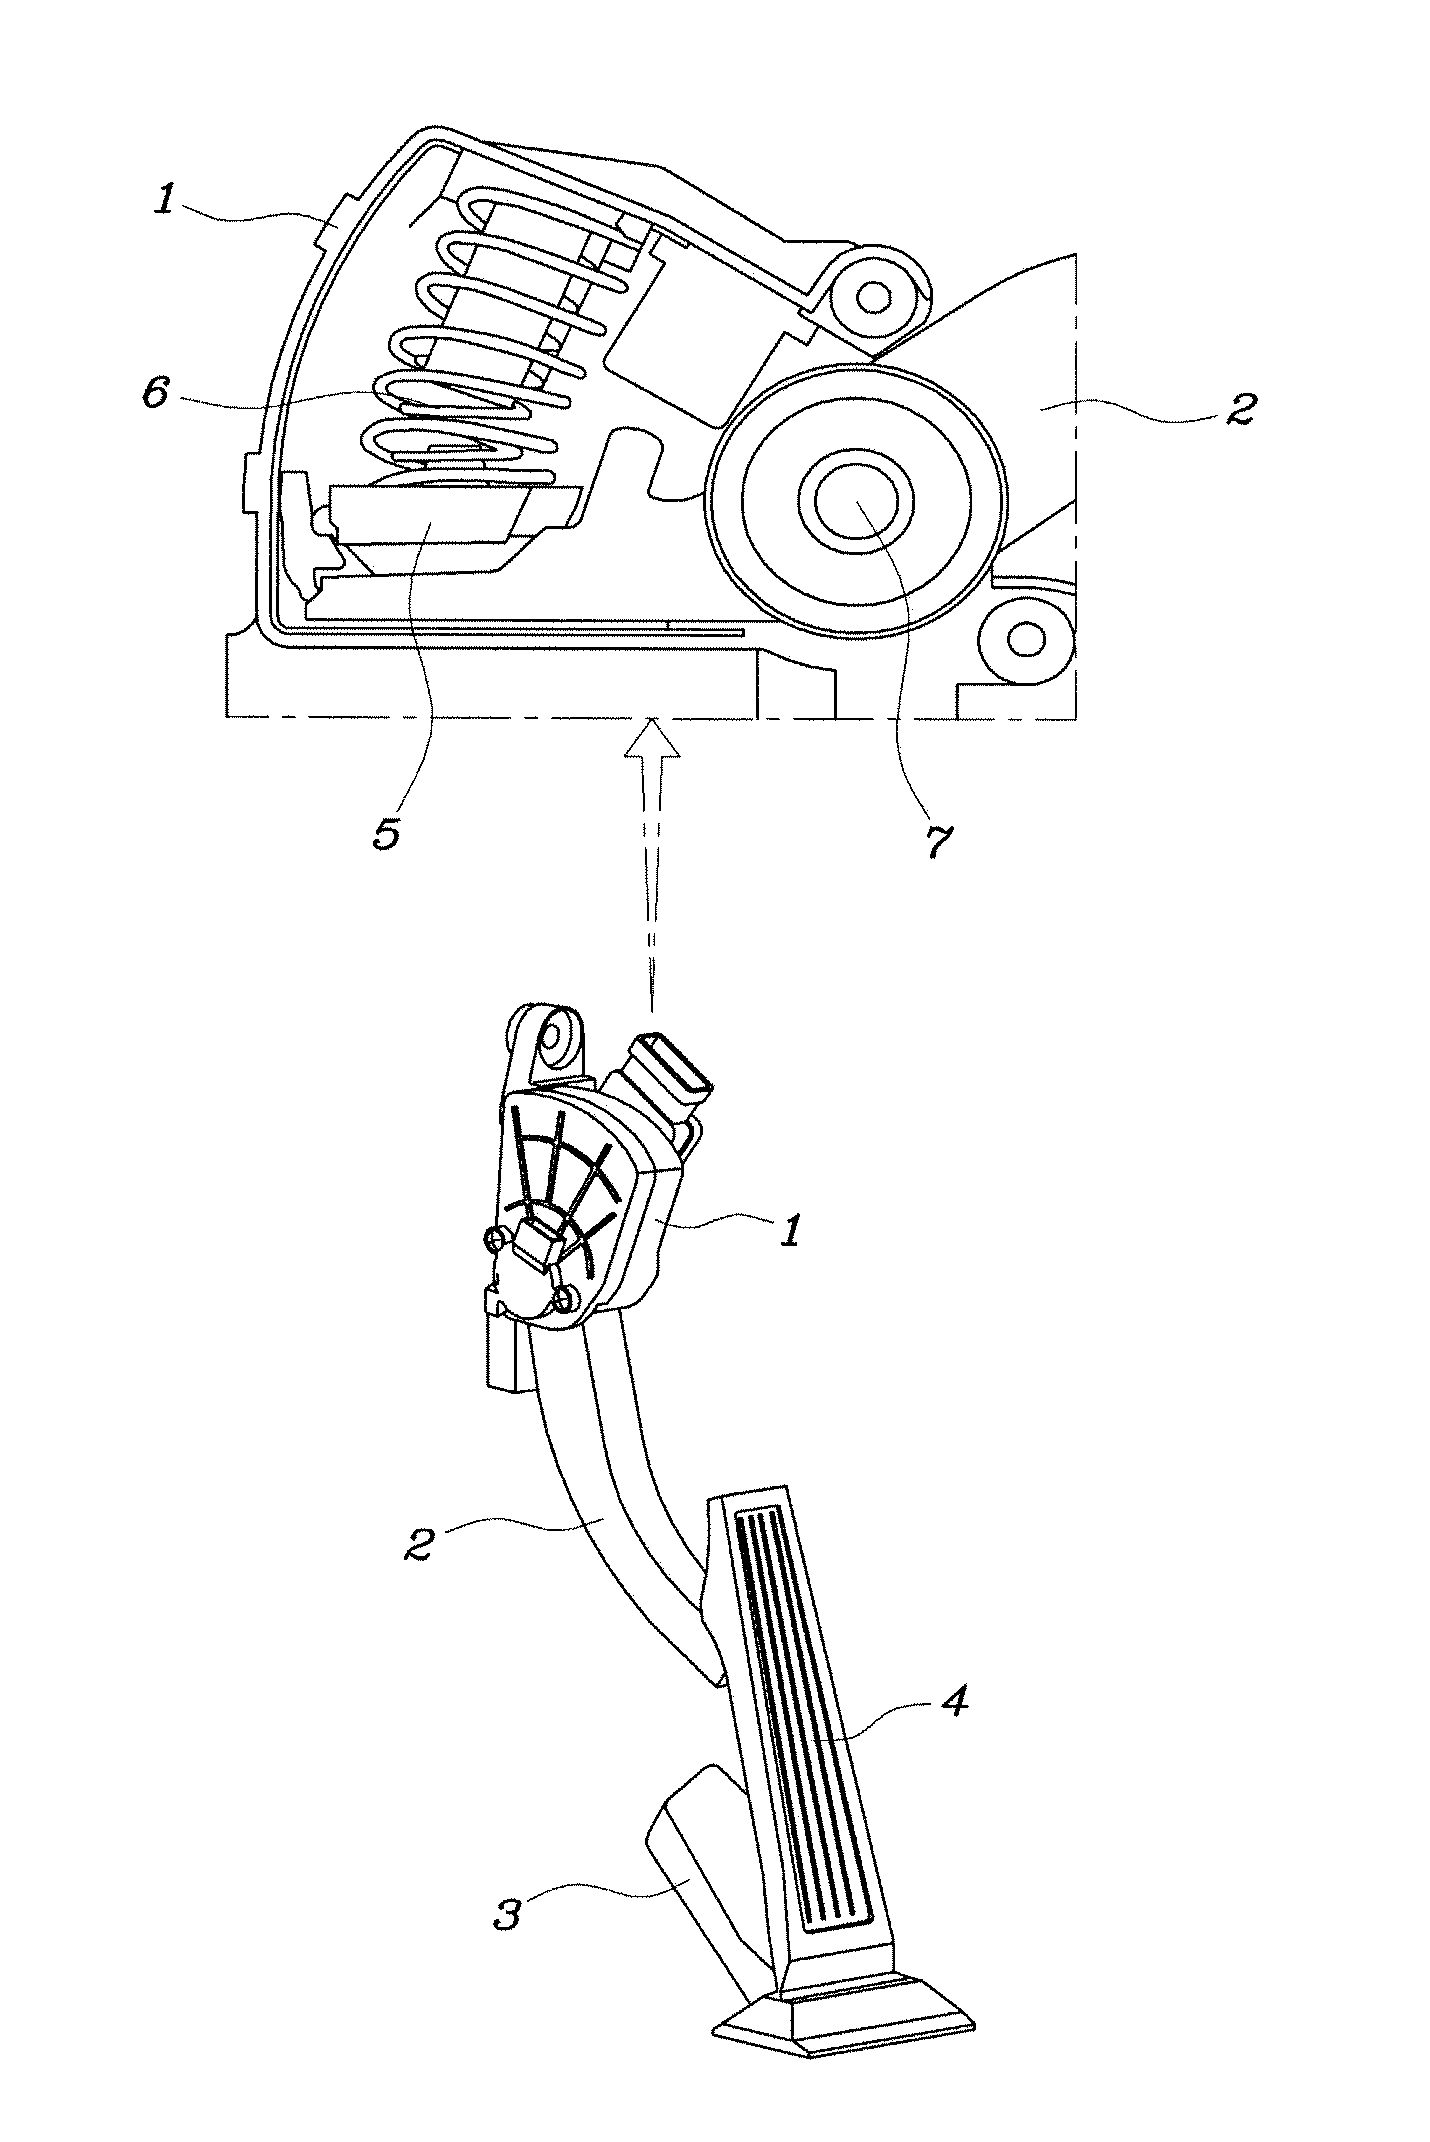 Accelerator pedal apparatus for vehicle